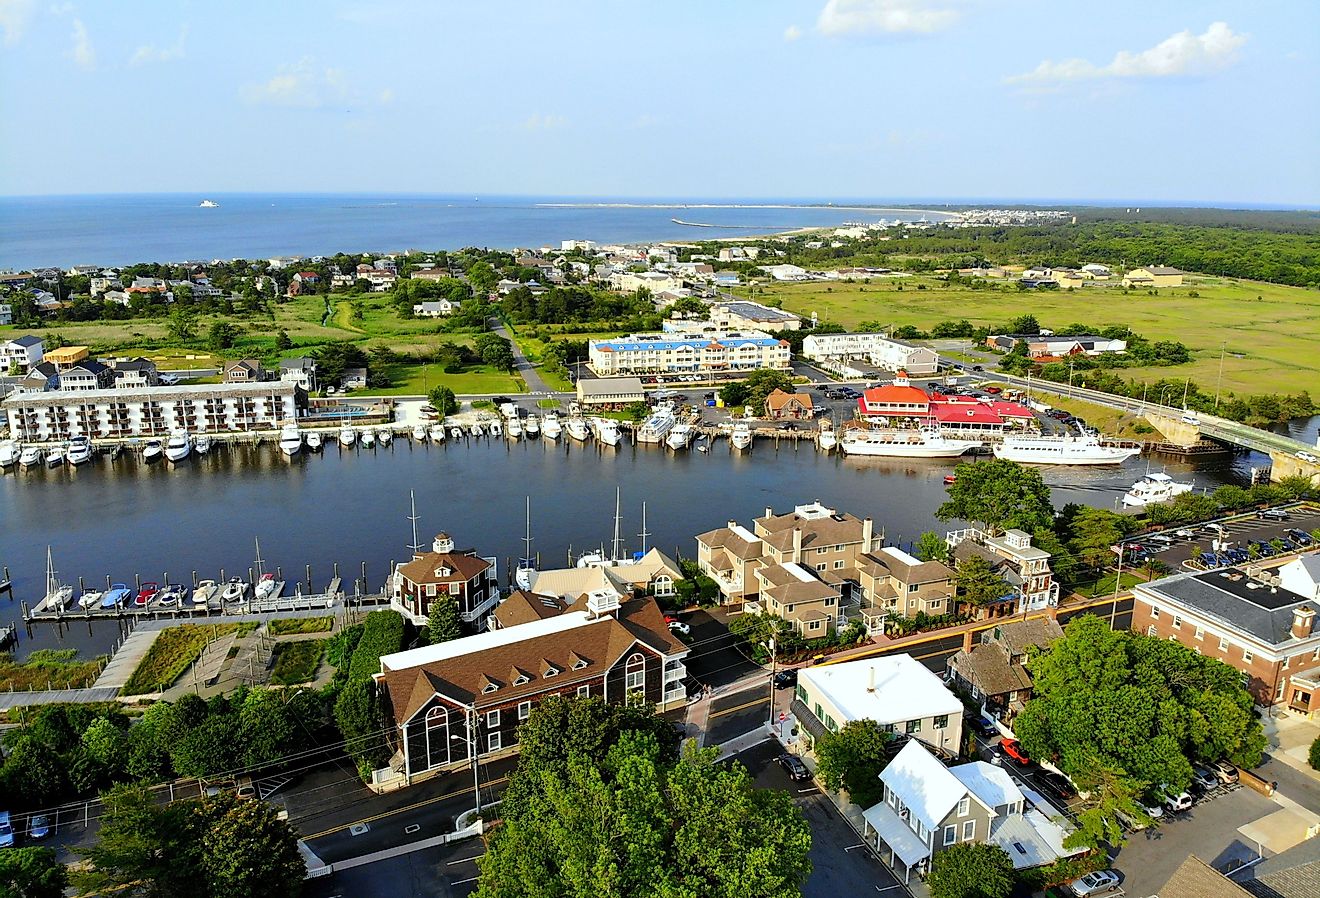 Aerial view of the beach town of Lewes with fishing port and waterfront residential homes along the canal. Image credit is Khairil Azhar Junos via Shutterstock.